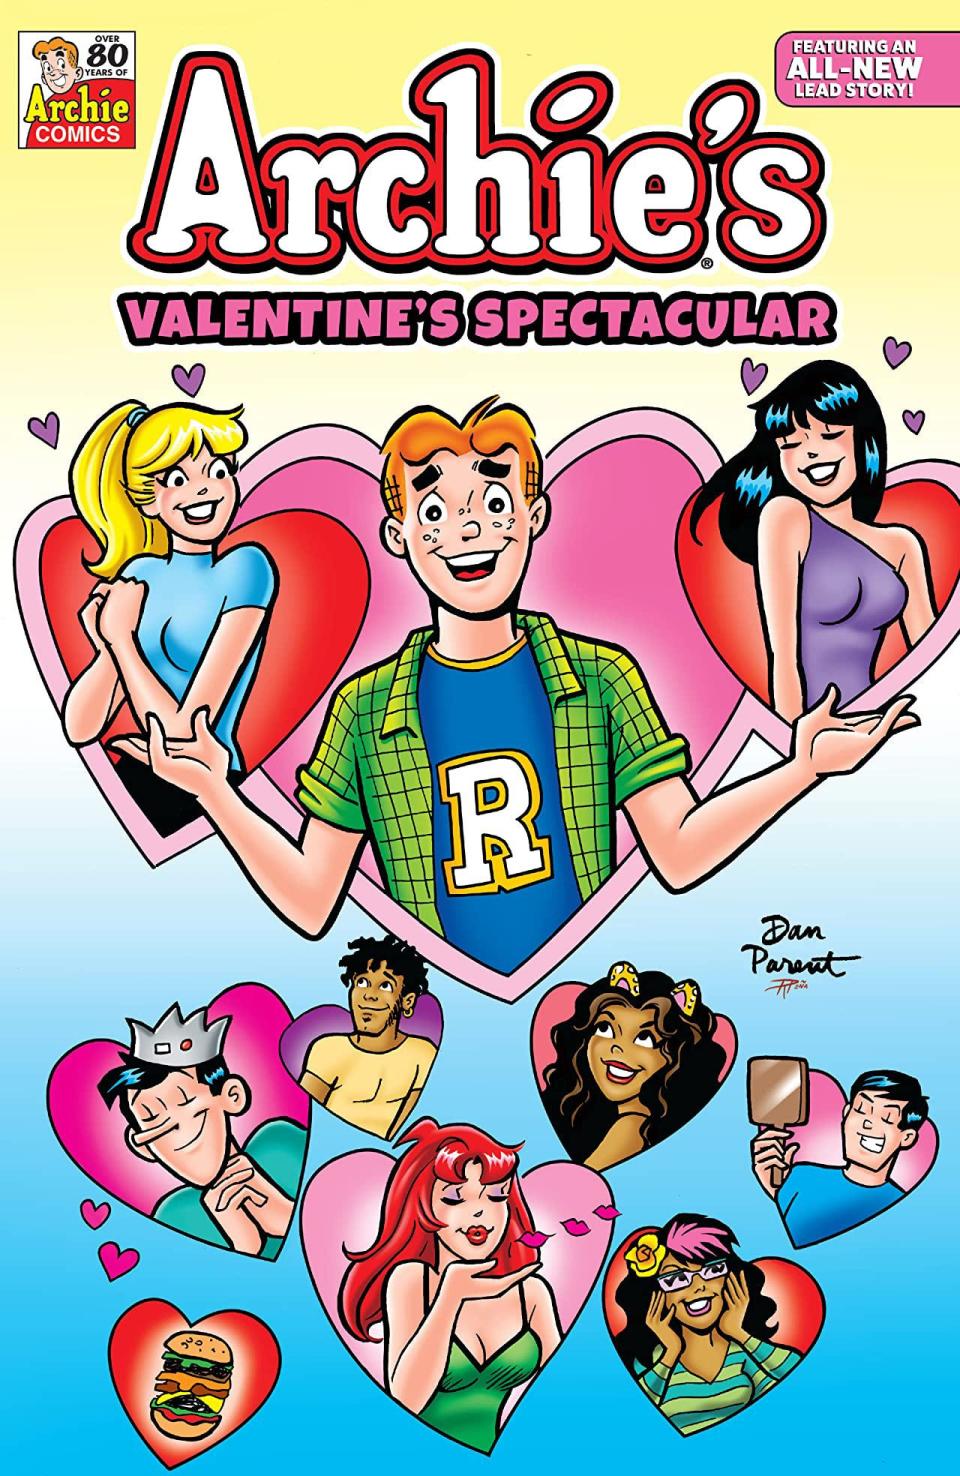 Archie Andrews must deal with the aftermath of a breakup in "Archie's Valentine's Spectacular."